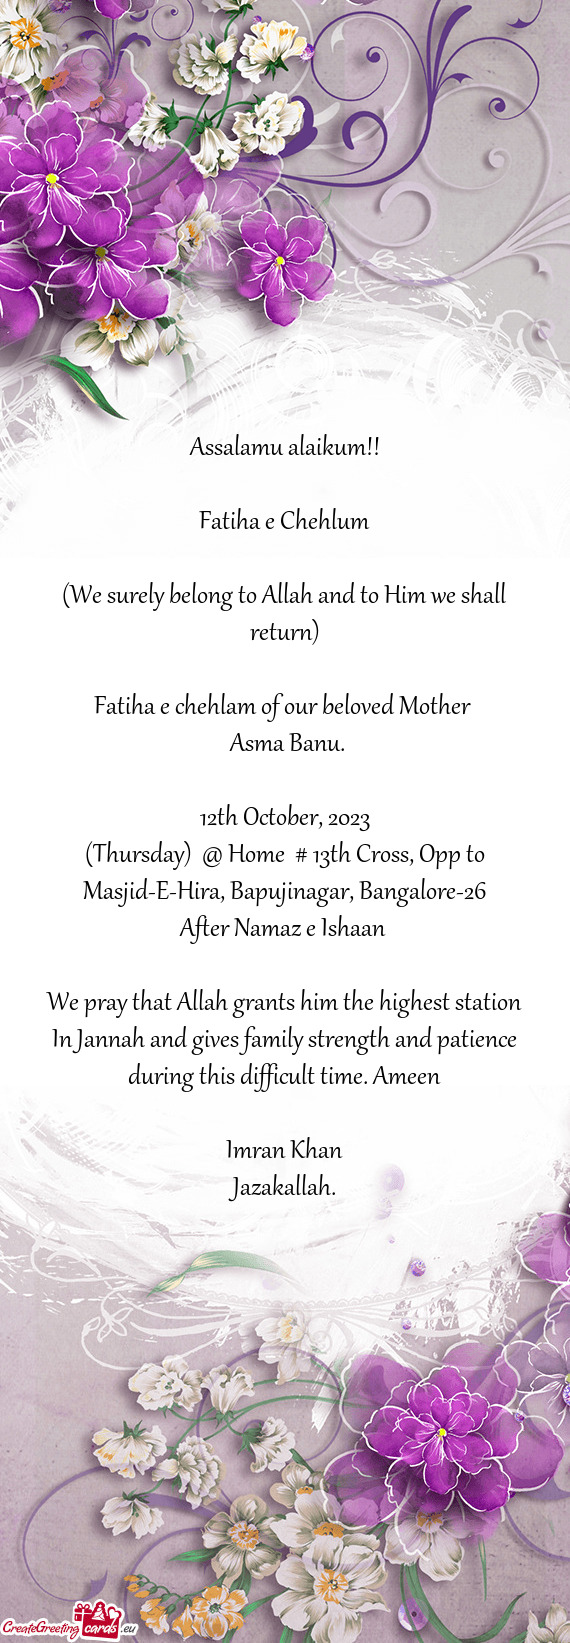 Fatiha e chehlam of our beloved Mother